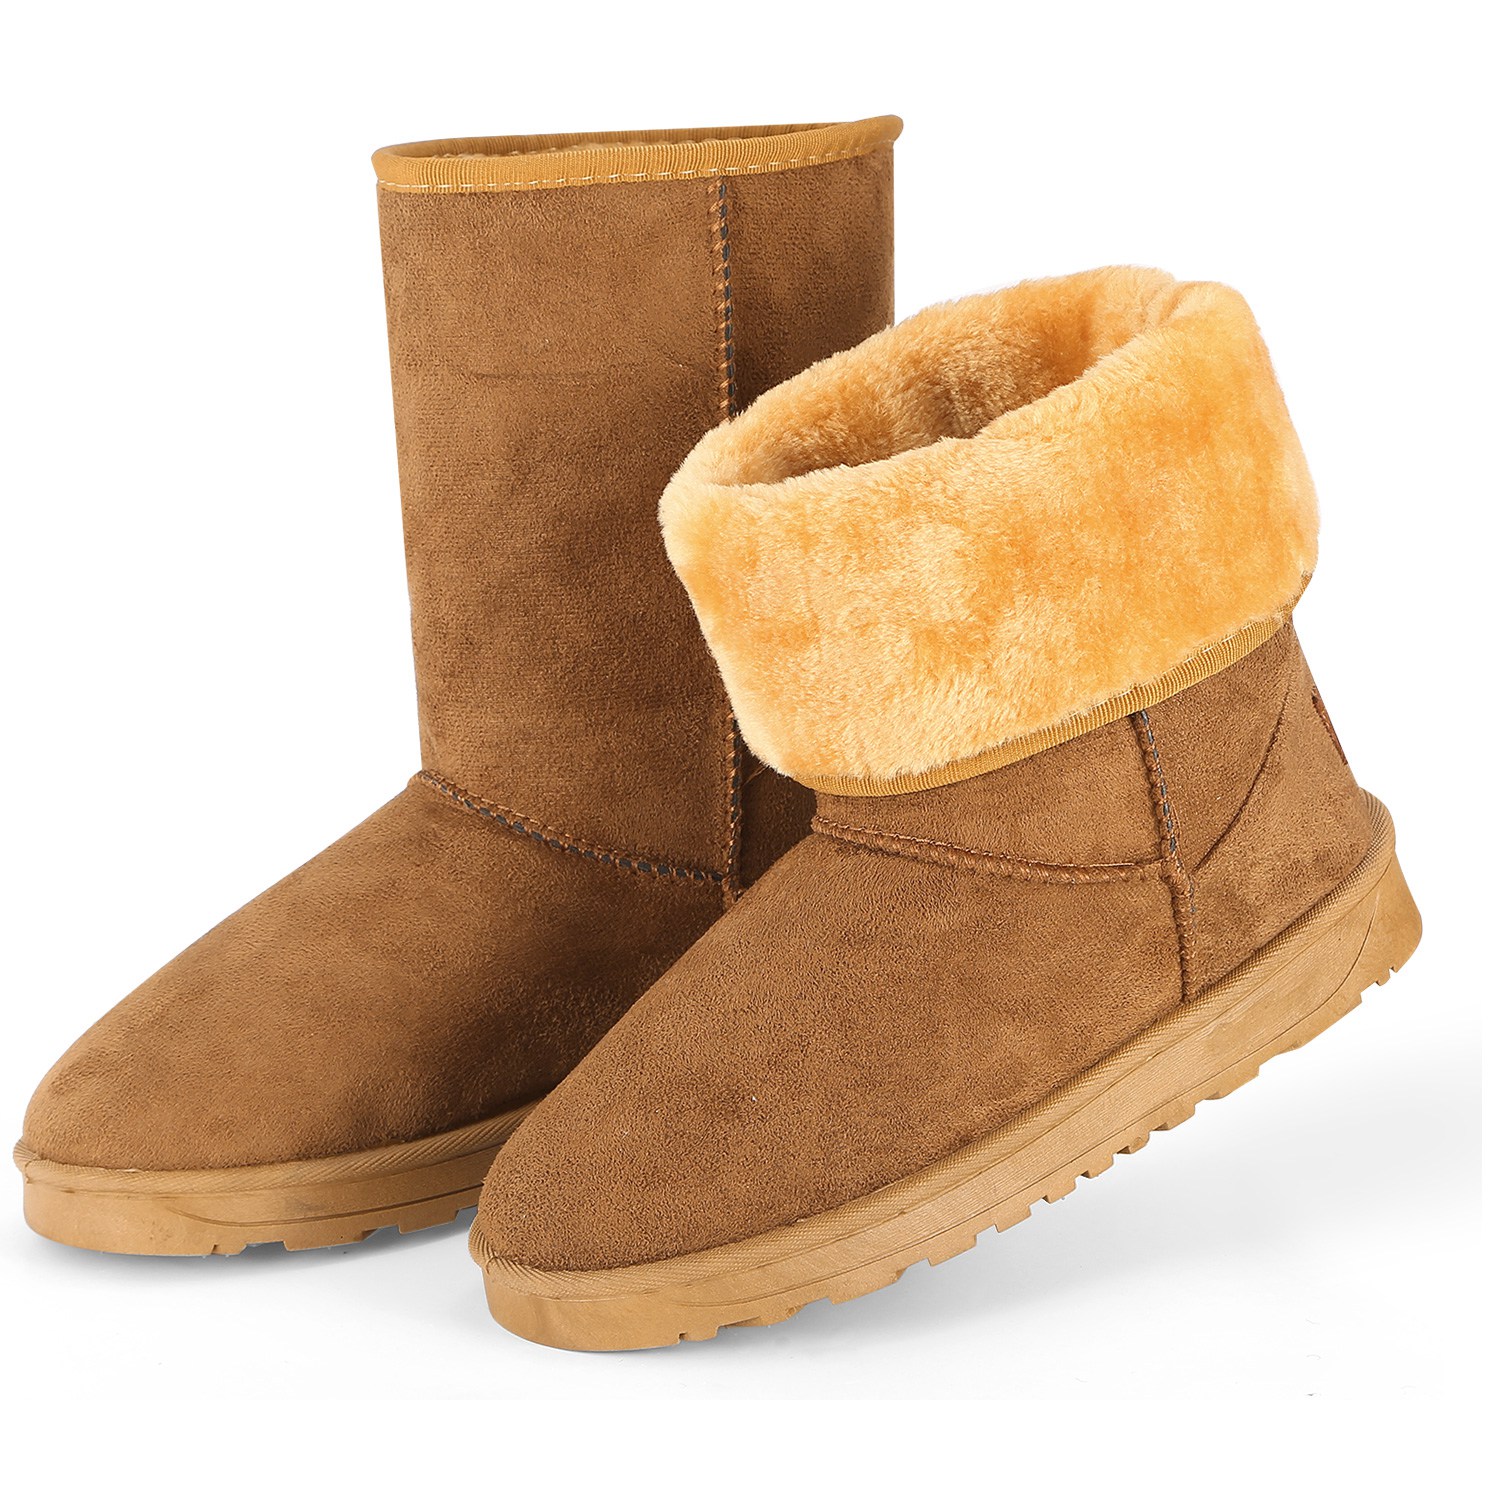 Mens /Womens classic snow boots with cozy fur lining and ANTI slipping outsole Featured Image